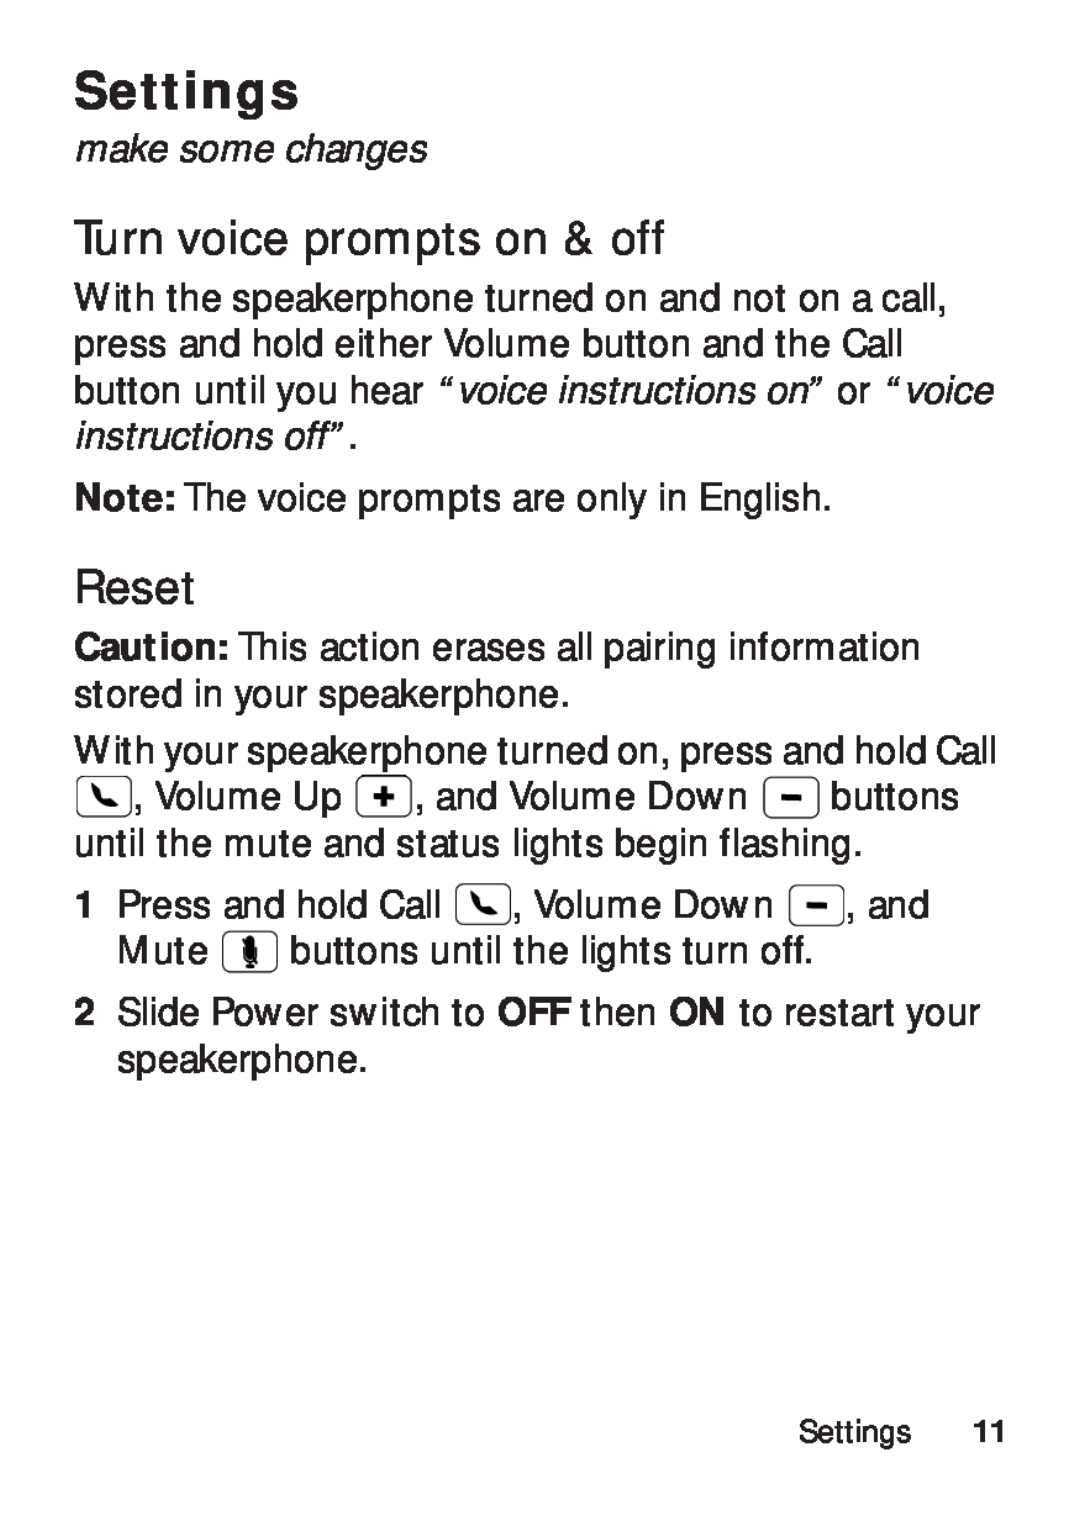 Motorola TX500 manual Settings, Turn voice prompts on & off, Reset, make some changes 